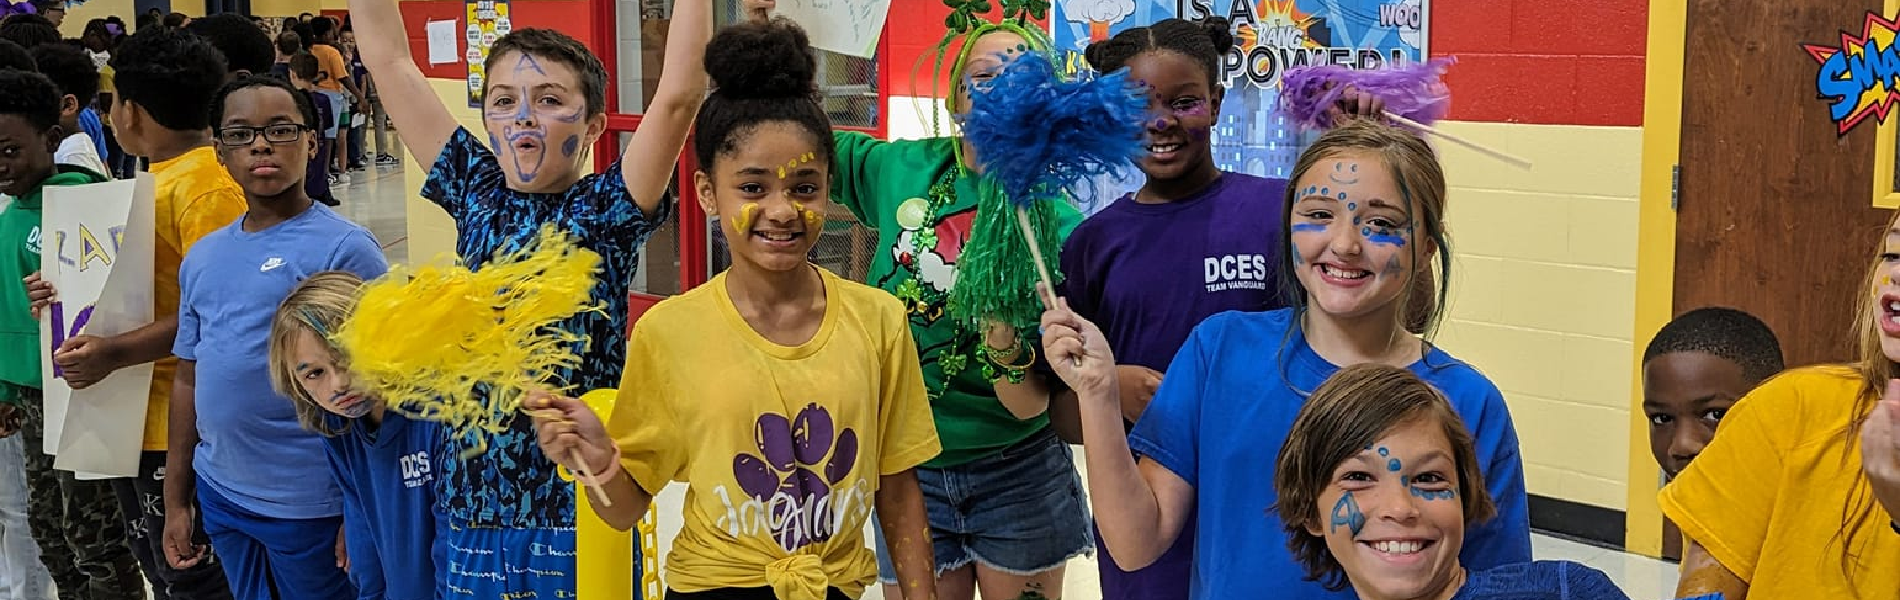 DeSoto Central Elementary Students 23